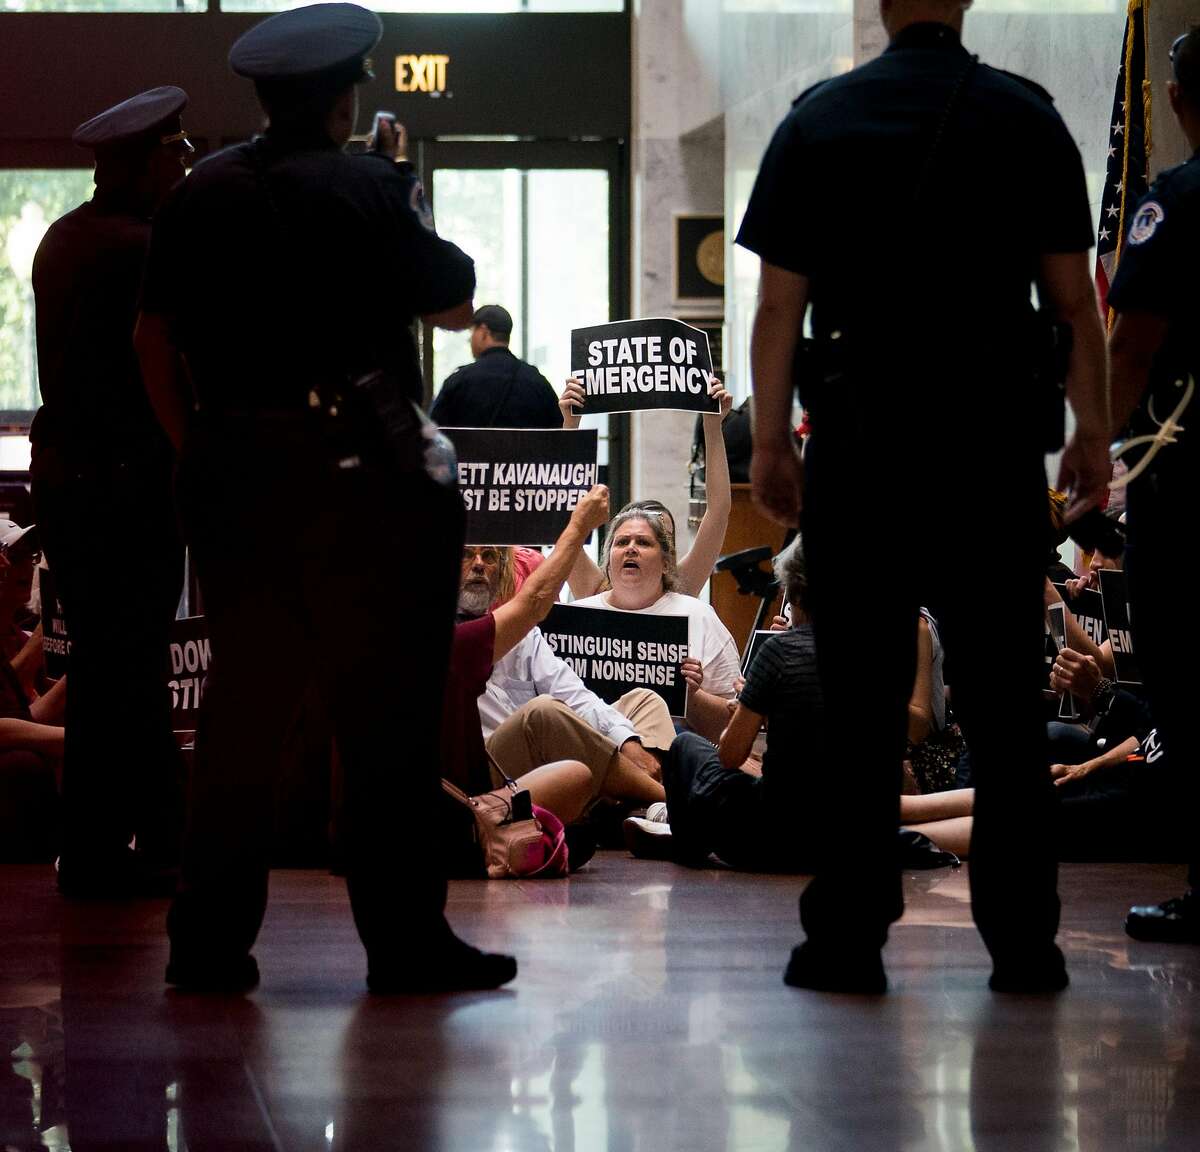 Demonstrators chant outside Sen. Chuck Grassley�s office before being arrested, during Judge Brett Kavanaugh's Supreme Court confirmation hearing on Capitol Hill in Washington, Sept. 6, 2018. (Erin Schaff/The New York Times)